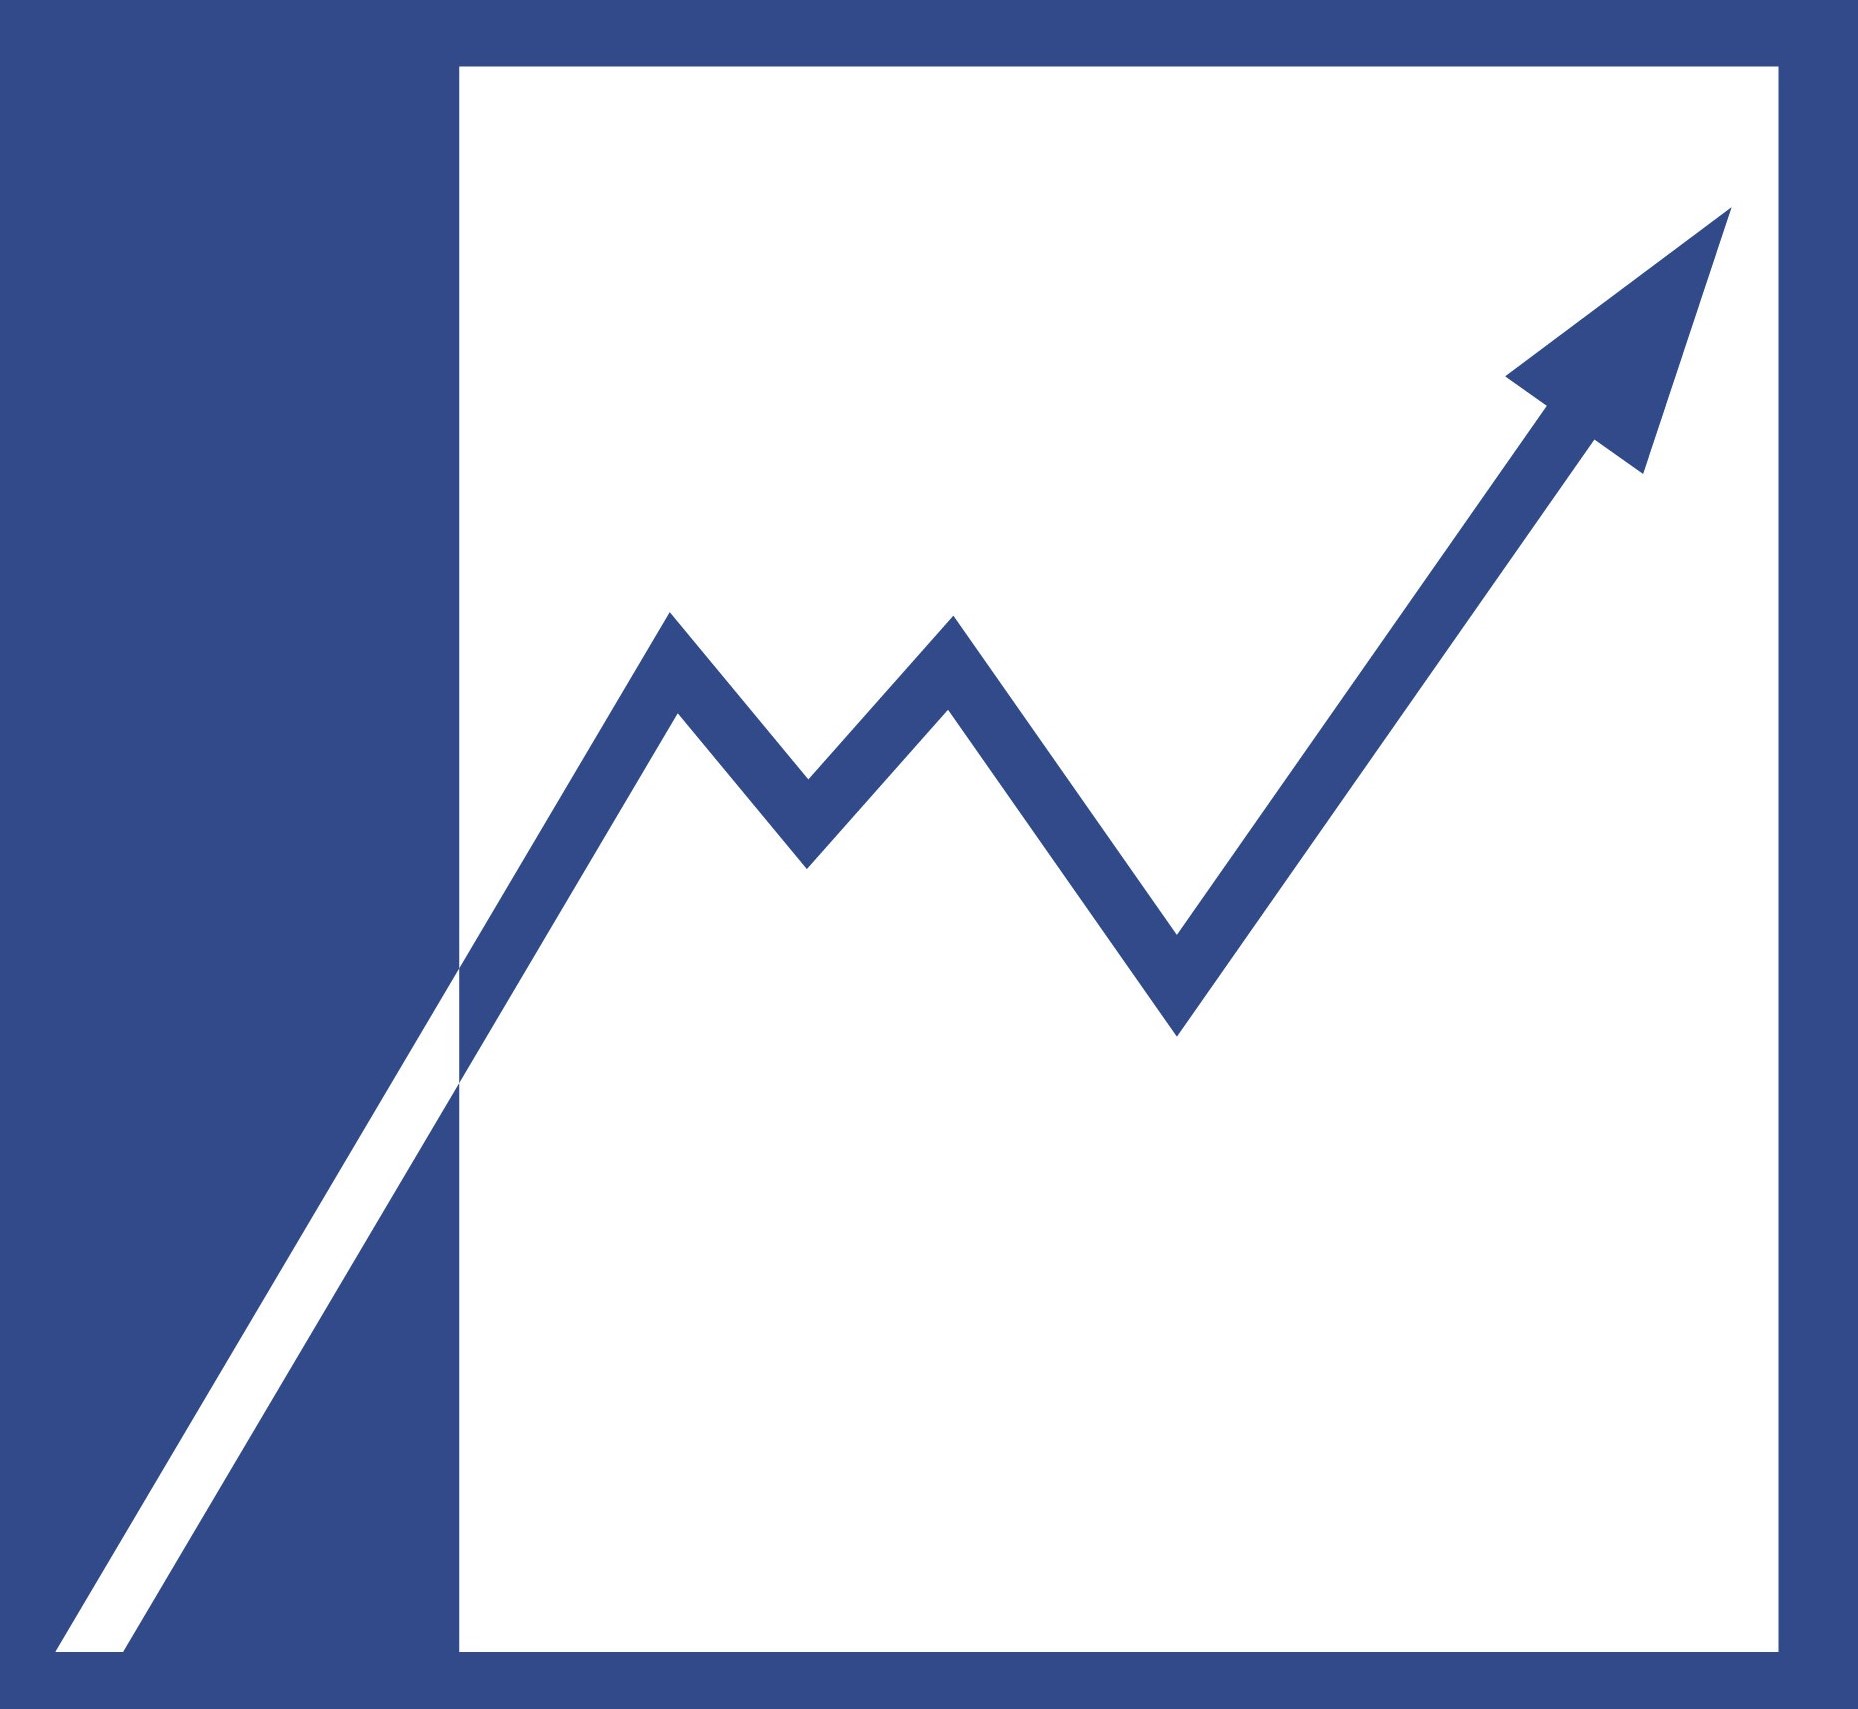 Blue background, white graph with Arrow pointed in the direction of upward growth